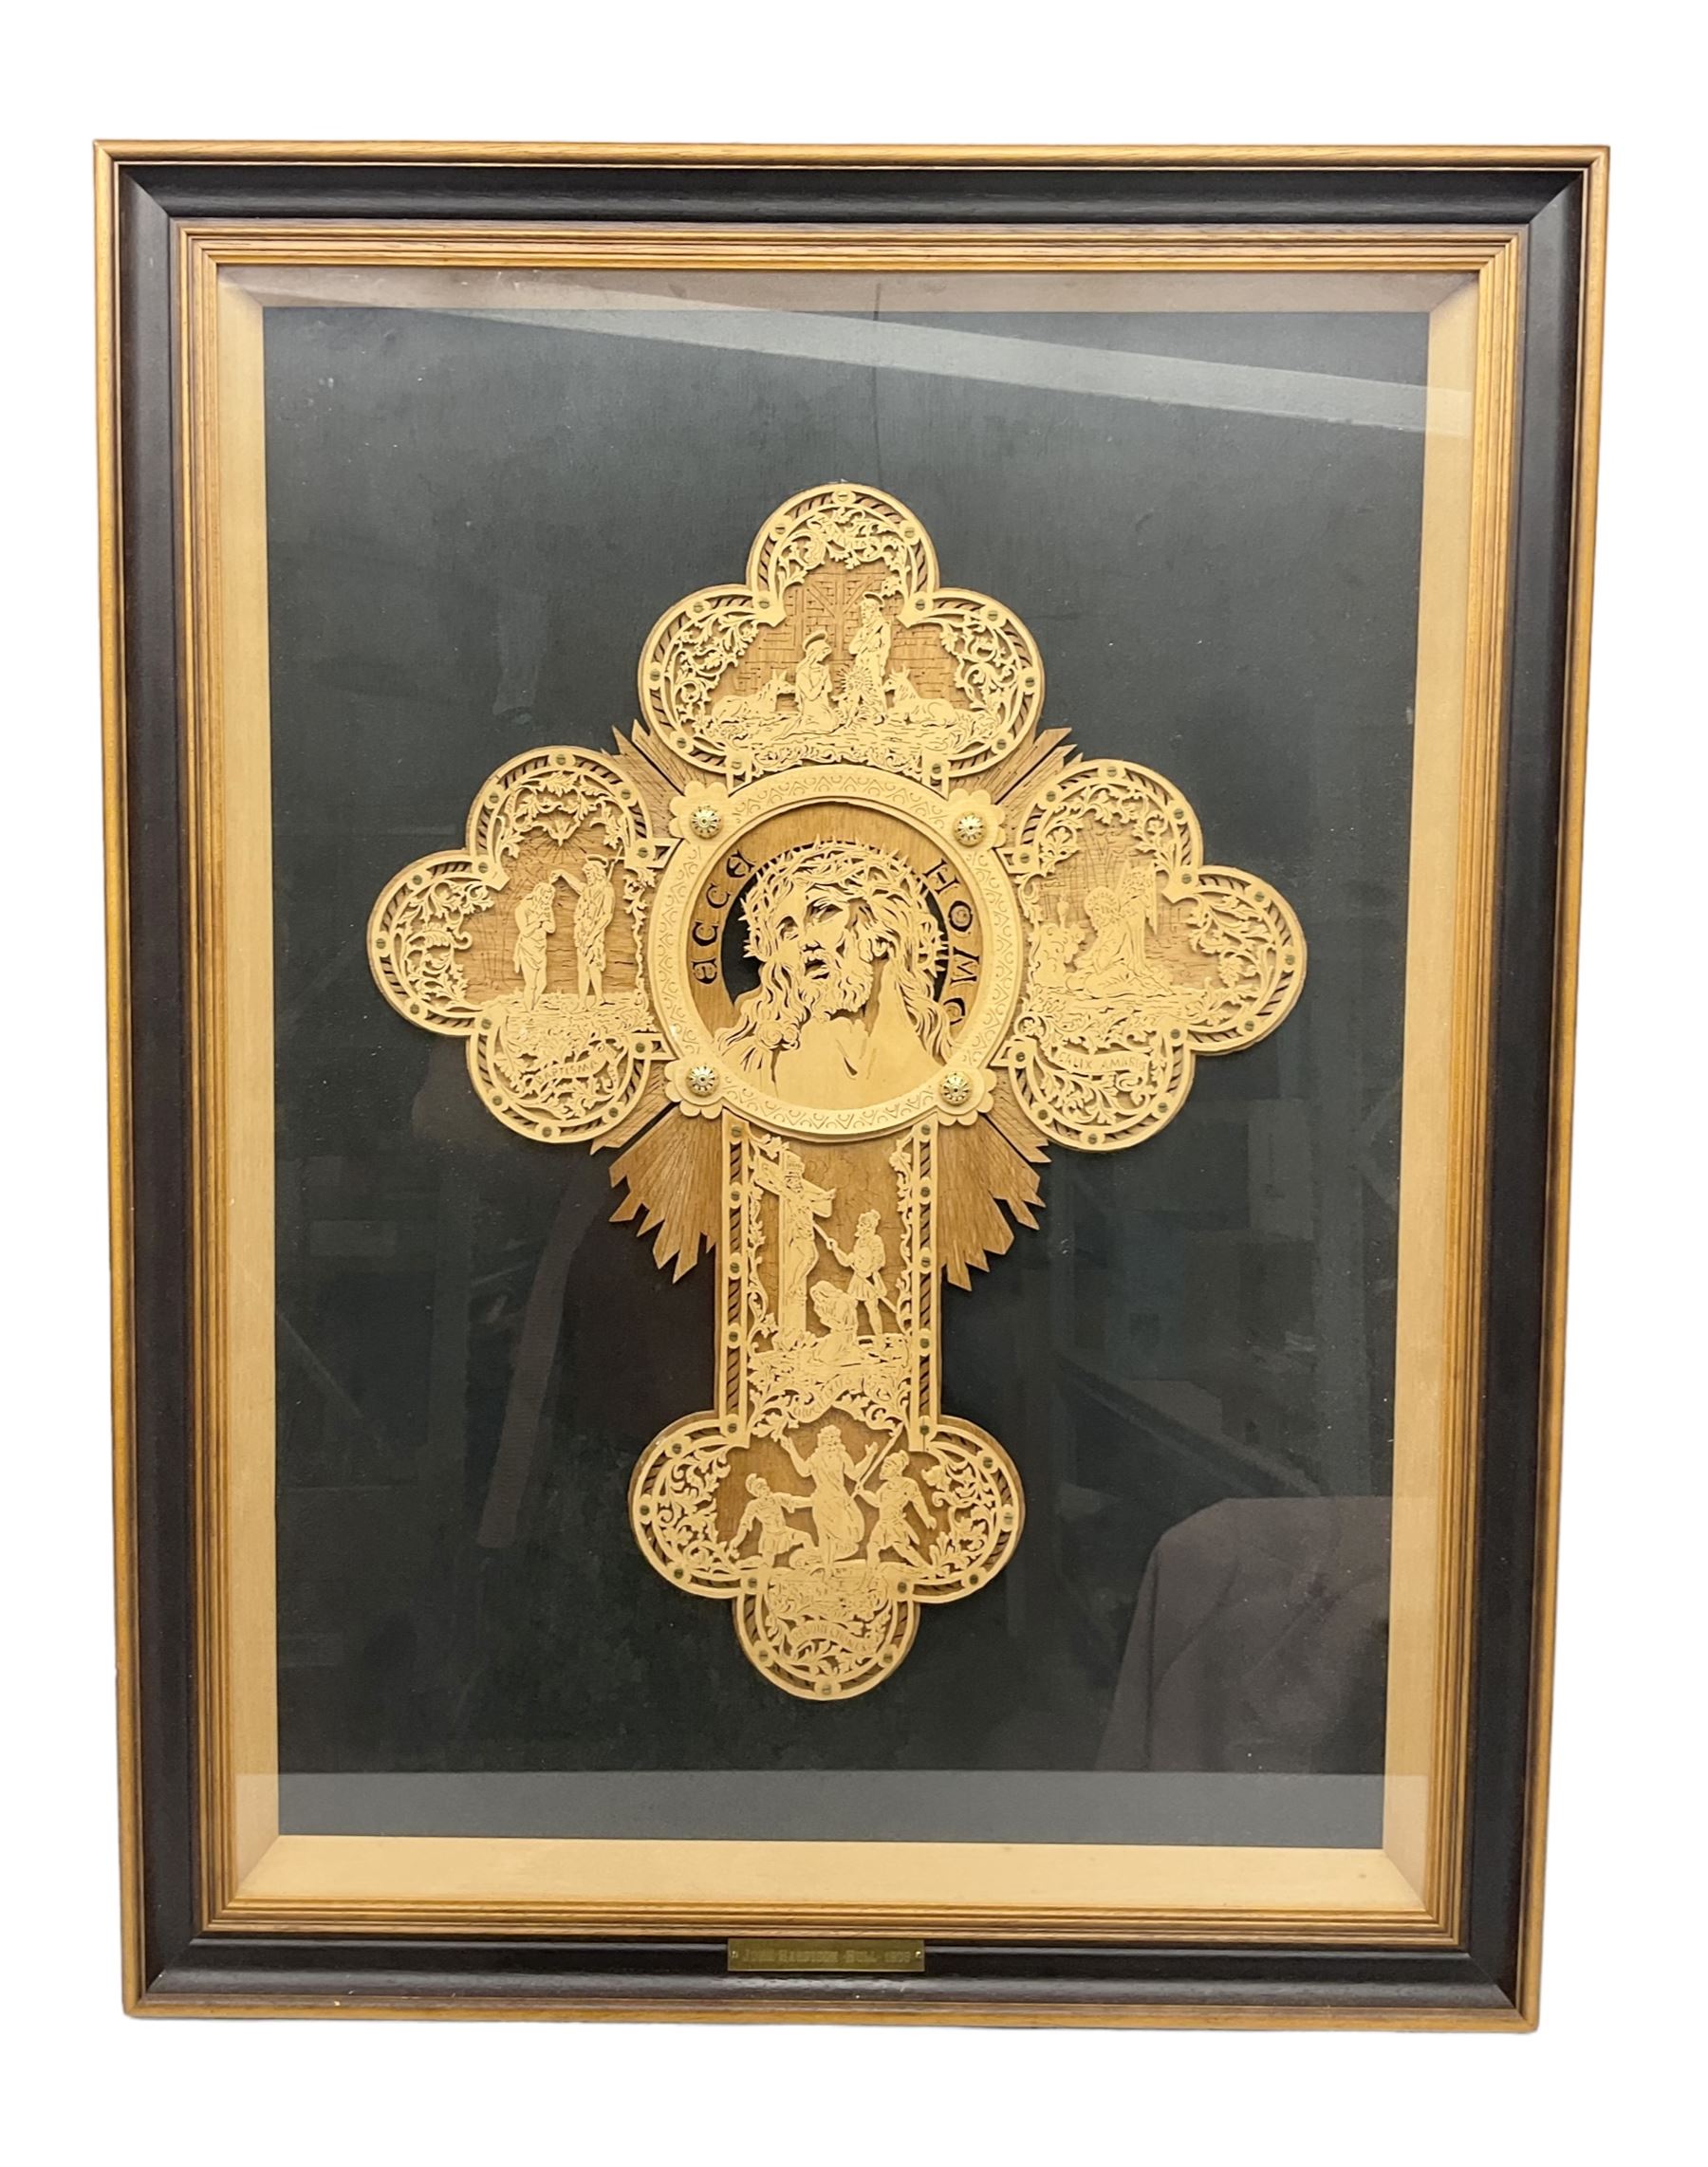 Cork carving of a religious cross depicting intricate scenes of various religious figures and motifs